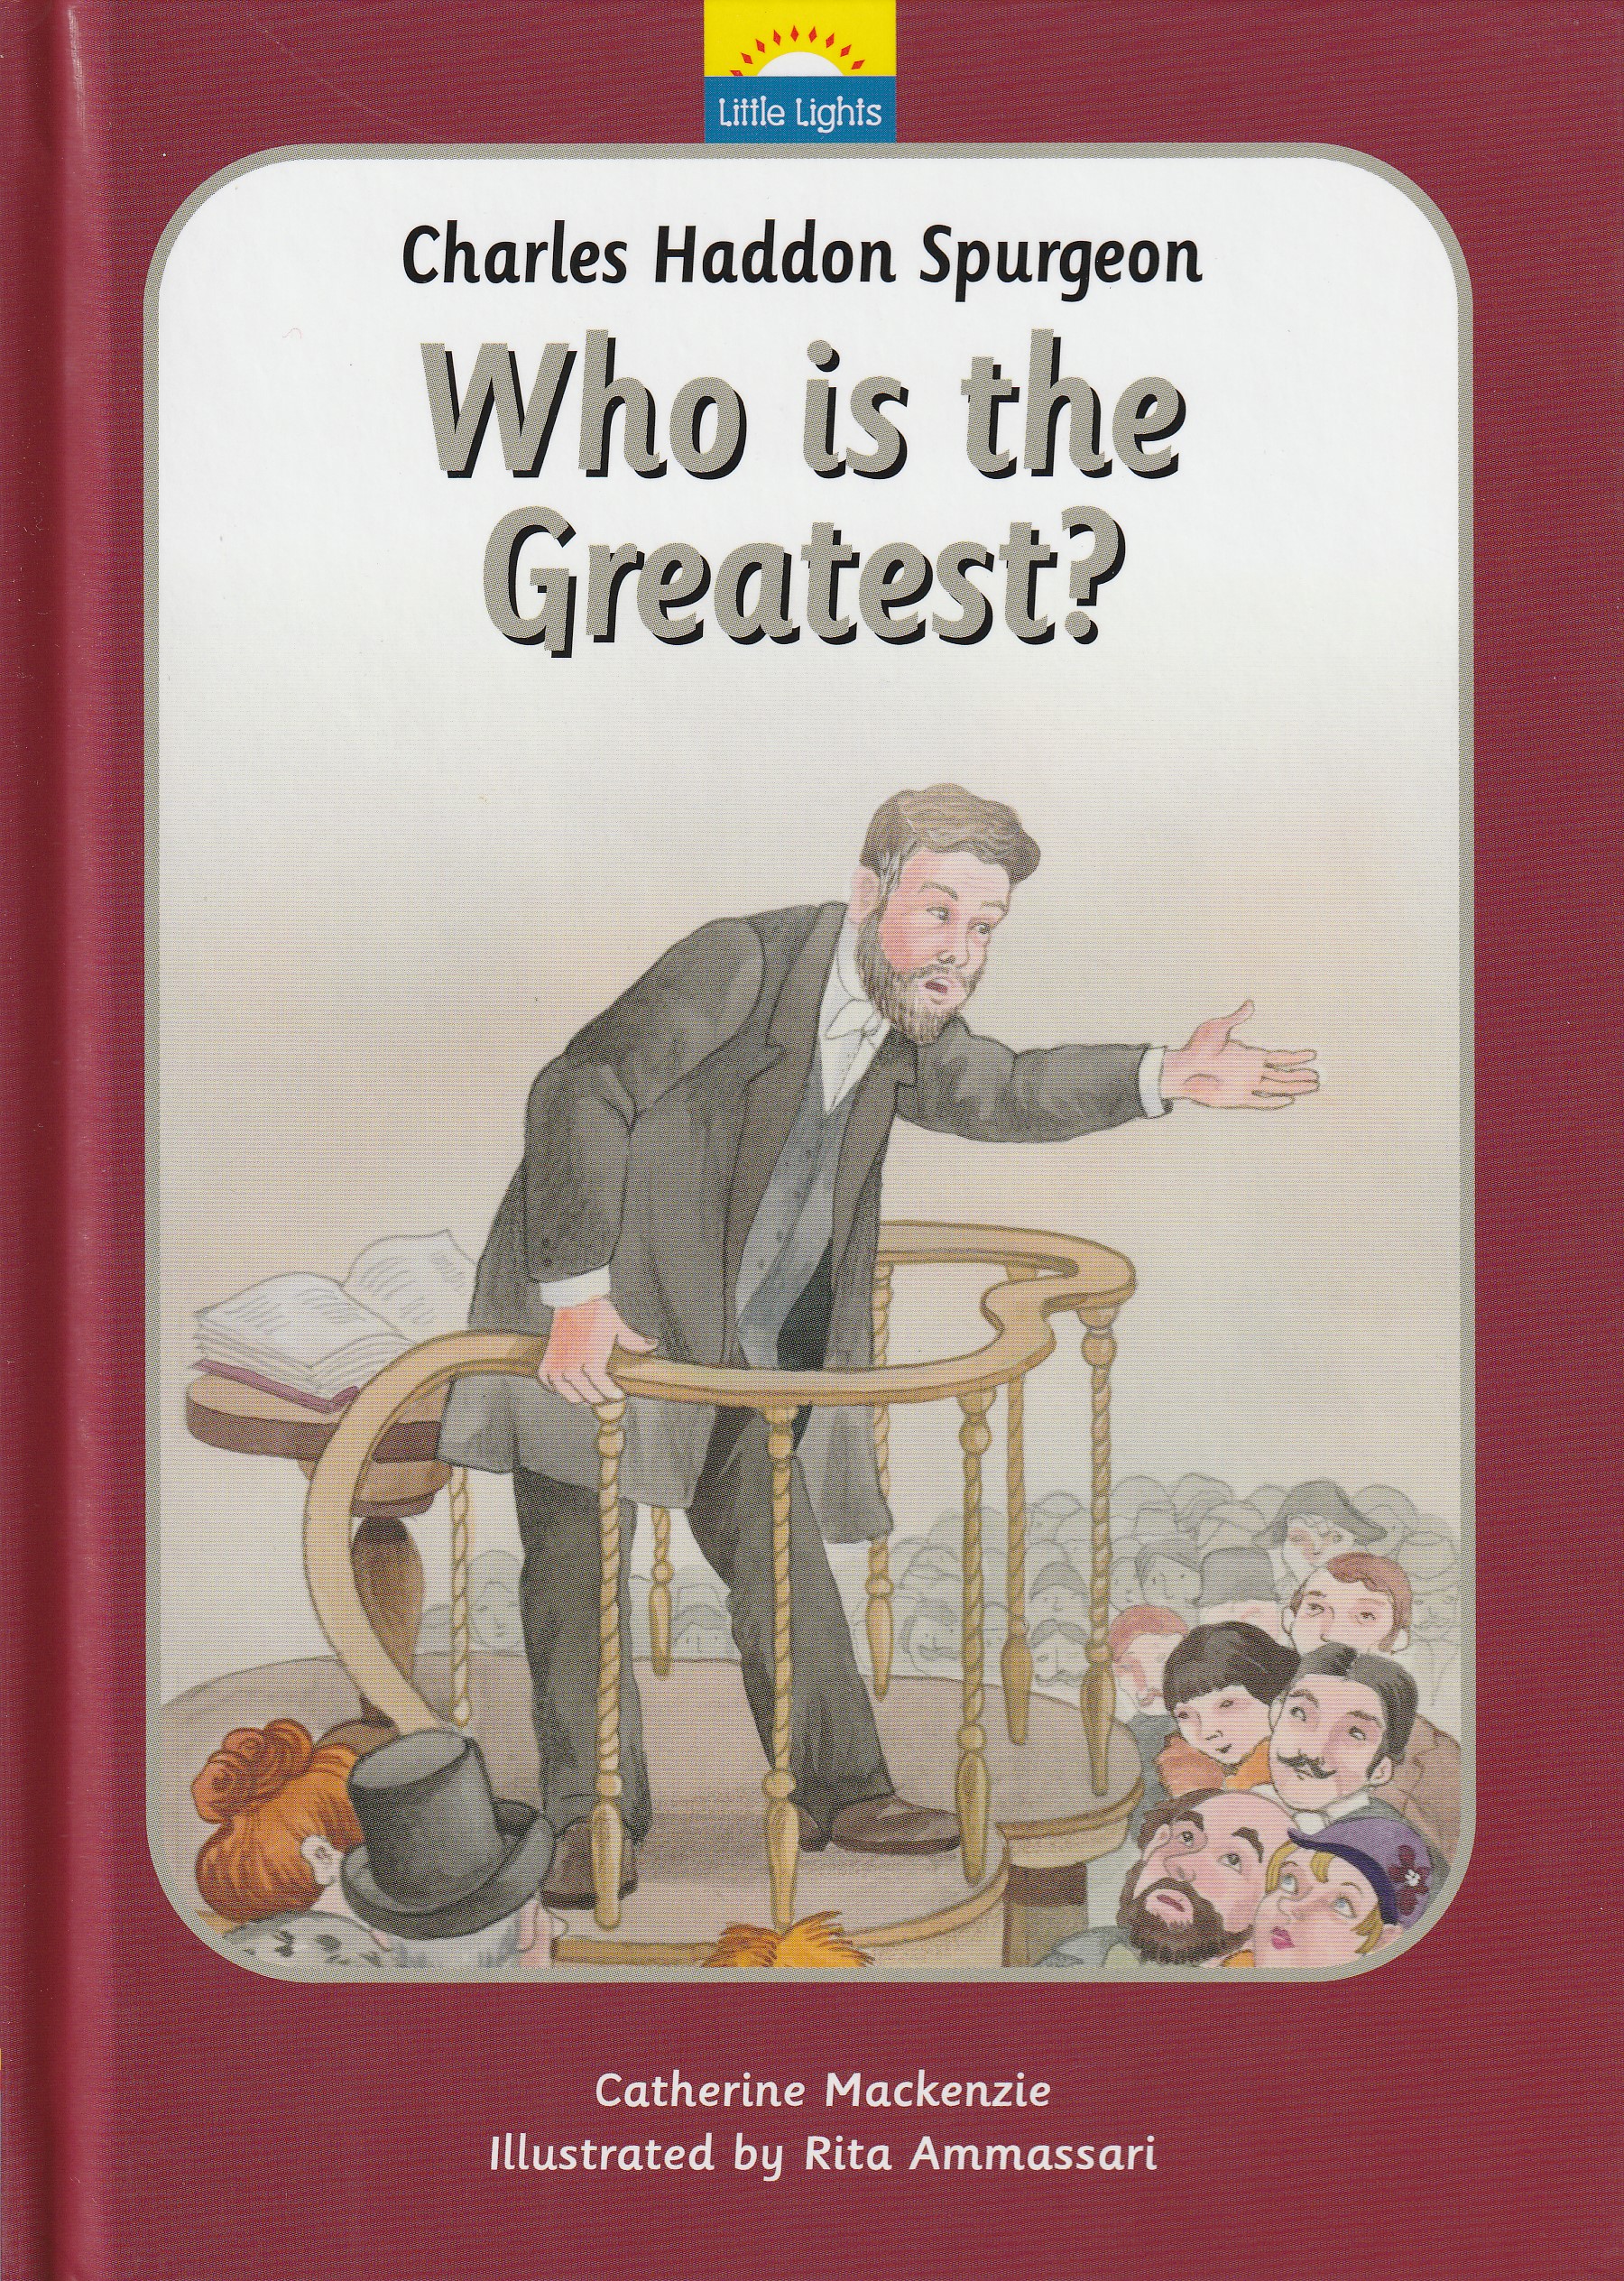 C.H. Spurgeon: Who is the Greatest?